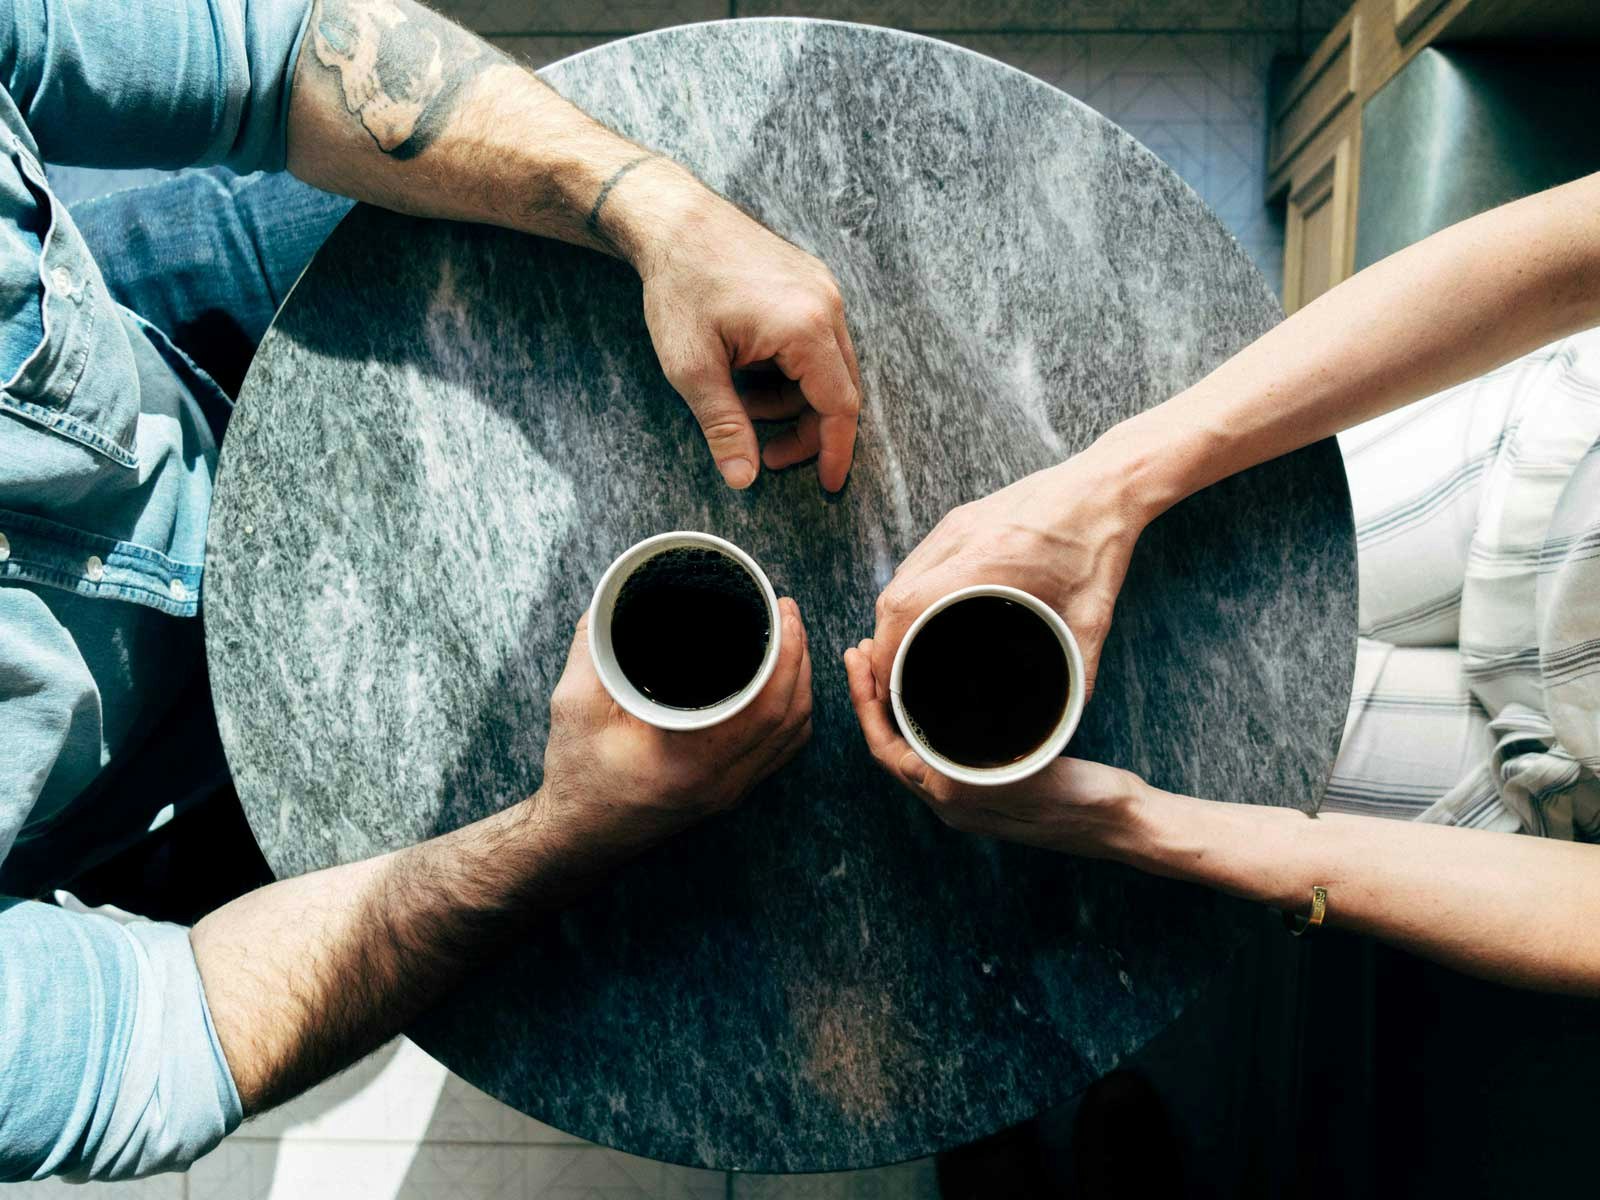 Two people sit at a table with mugs of coffee.